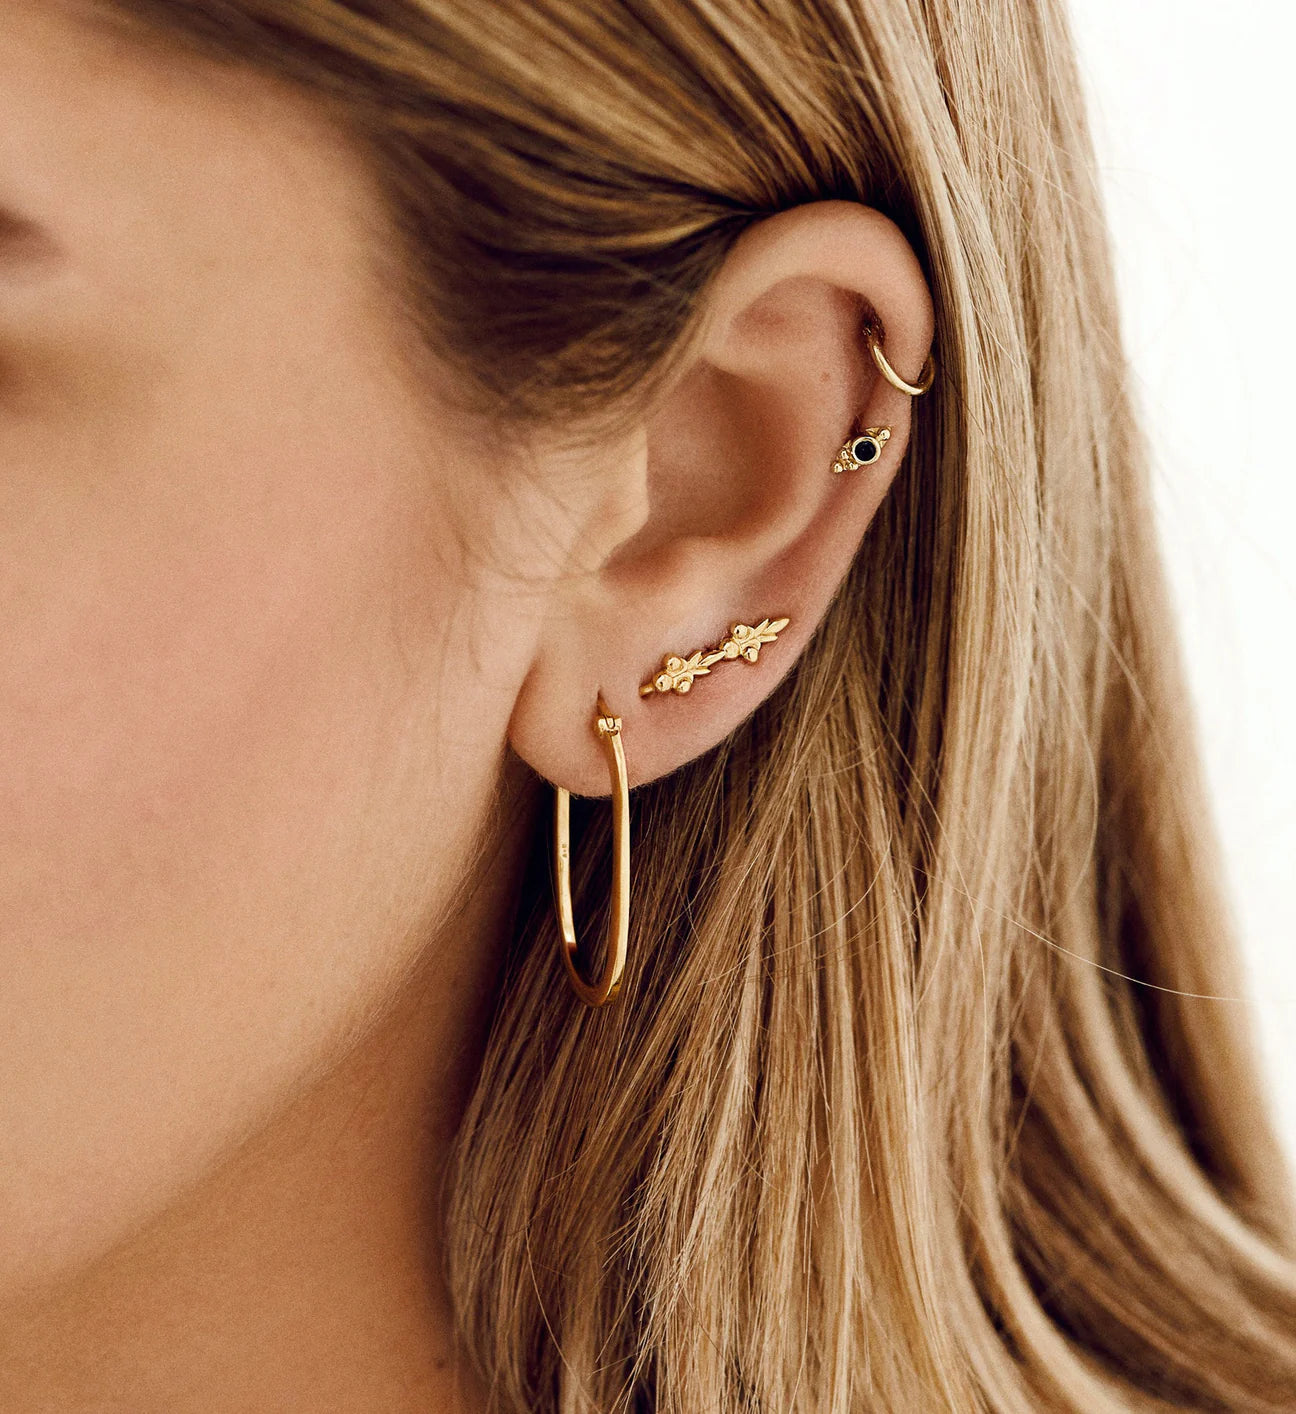 A woman wearing a pair of Anna + Nina Link Hoop Earring - Goldplated with a geometric shape.